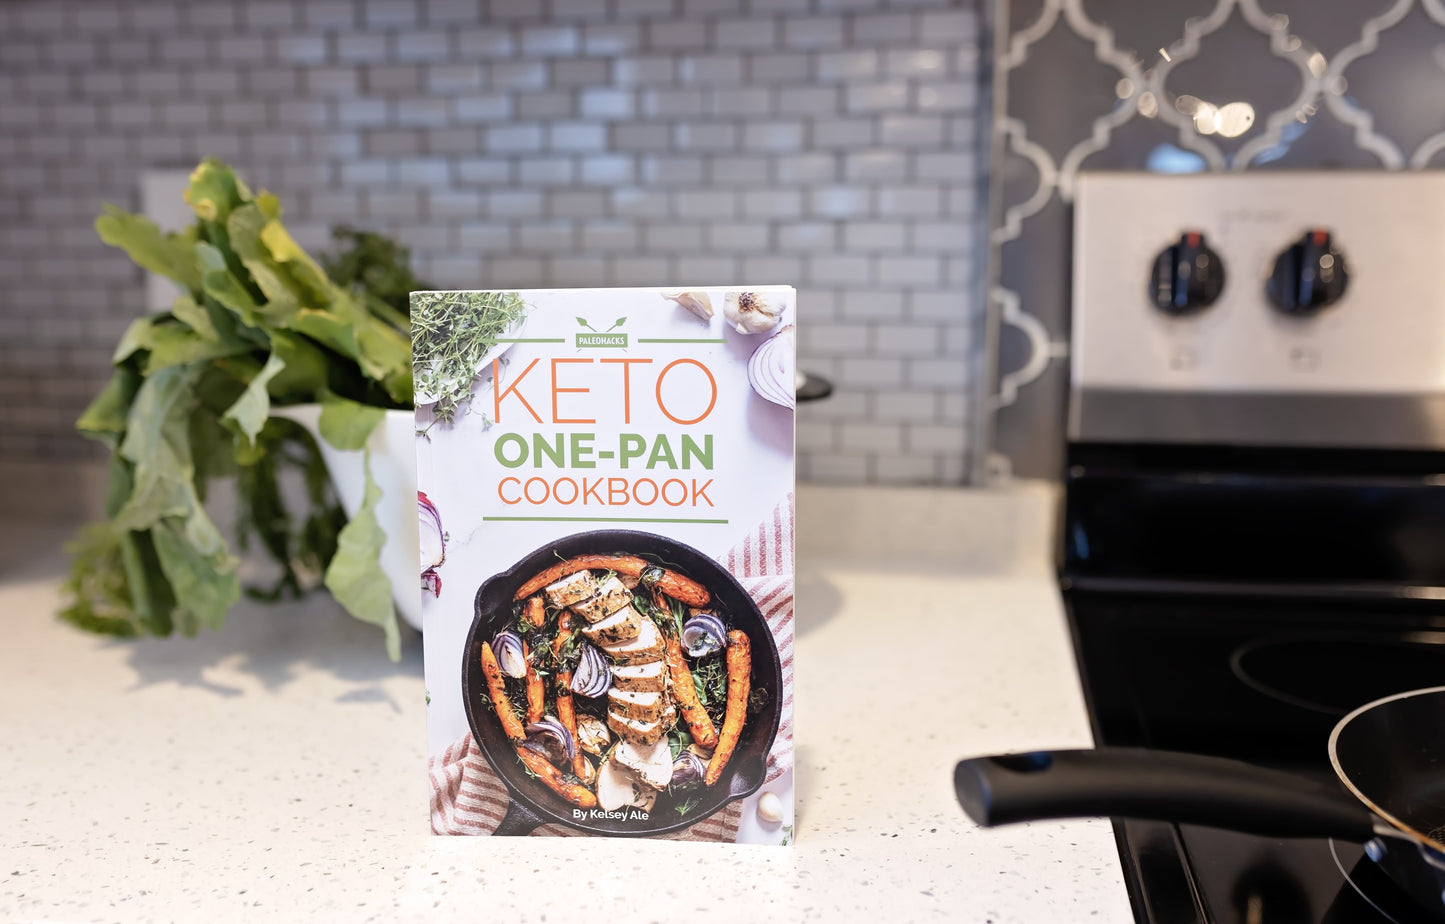 Keto One-Pan Cookbook rests on a smooth marble surface. A bowl of vegetables and a cooking appliance are visible.